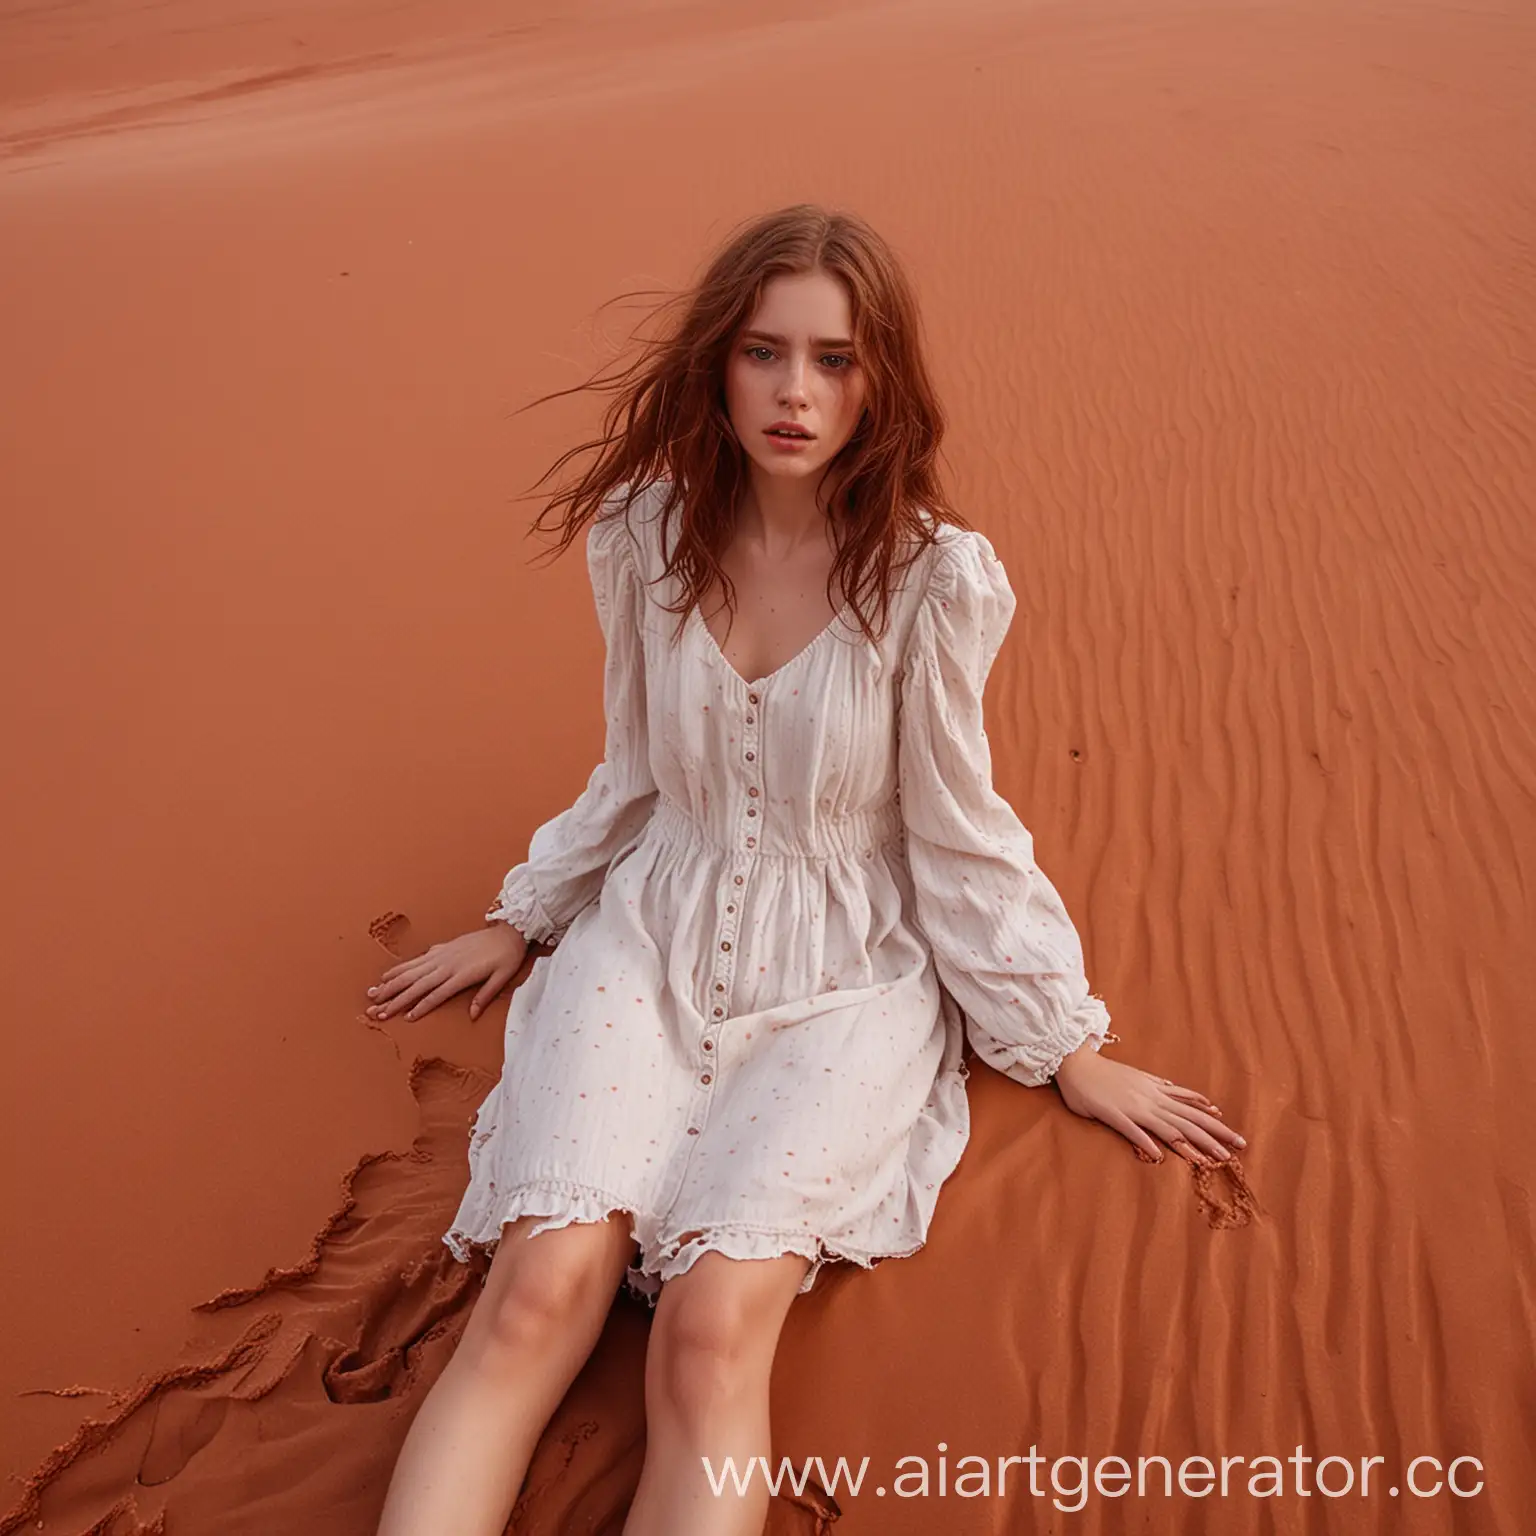 Girl-with-Chestnut-Hair-Drowning-in-Red-Dunes